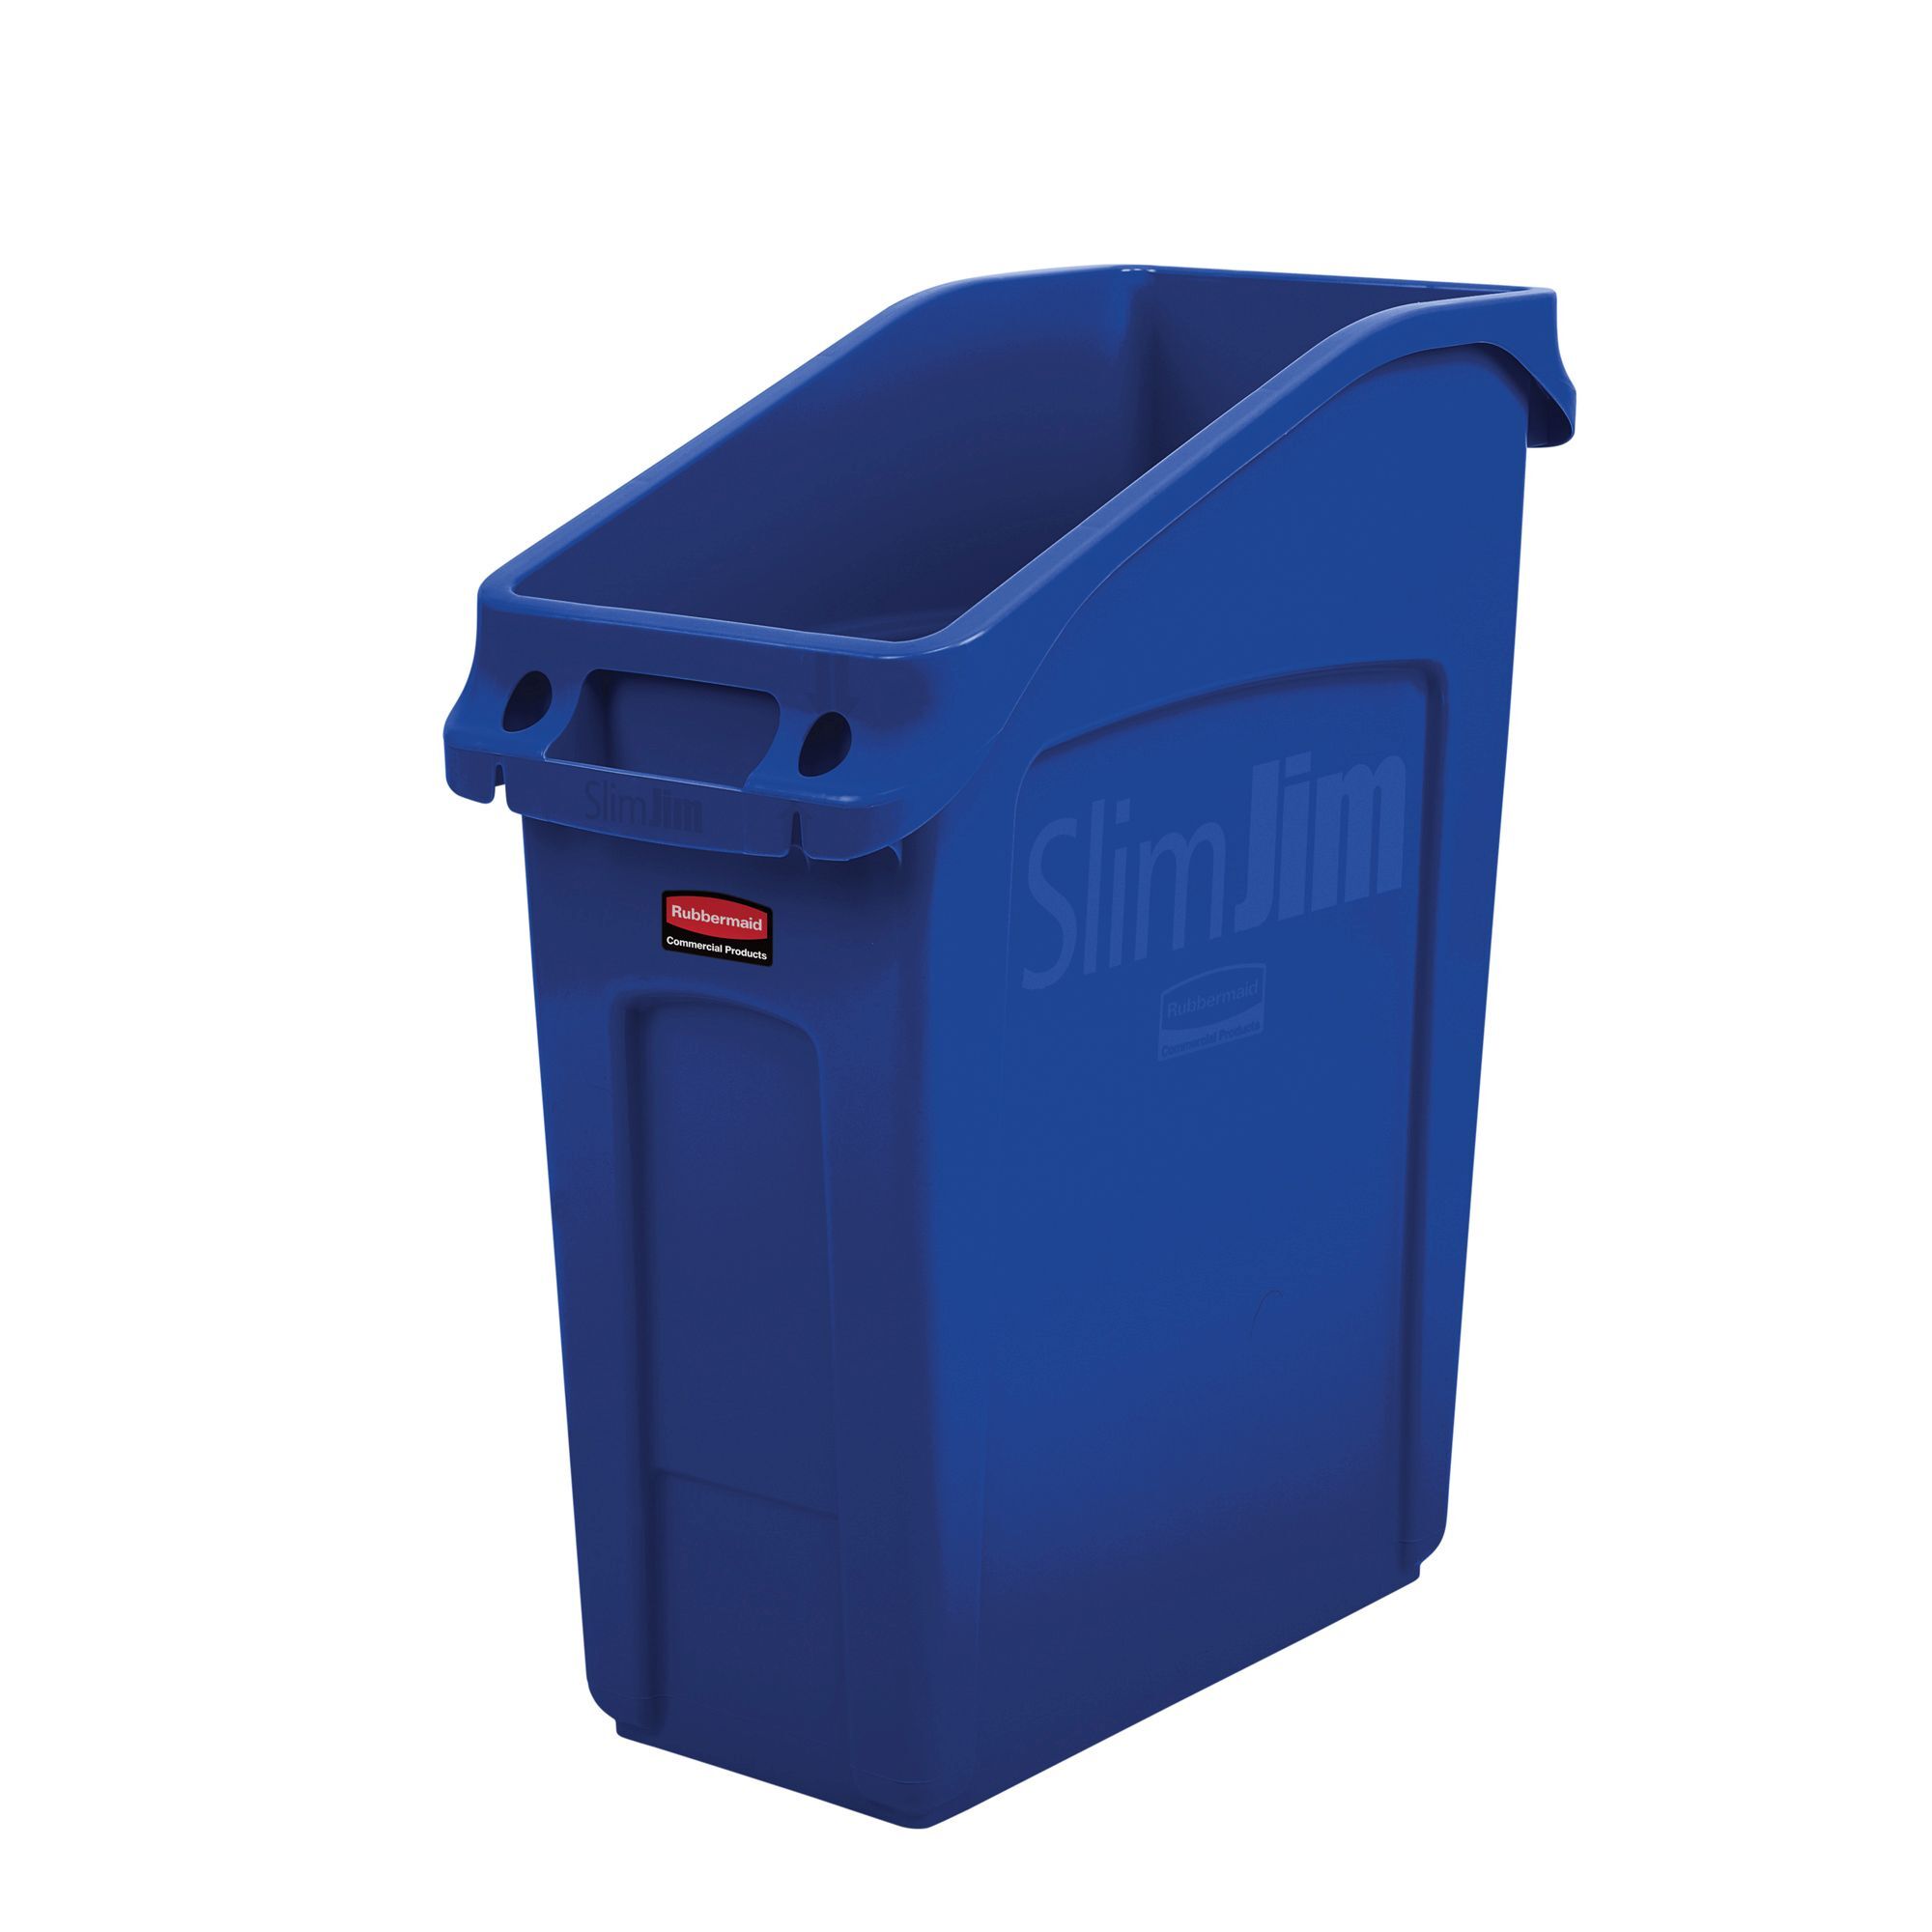 Rubbermaid Slim Jim Under-Counter container 49 ltr, Rubbermaid, model: VB 237672, blauw